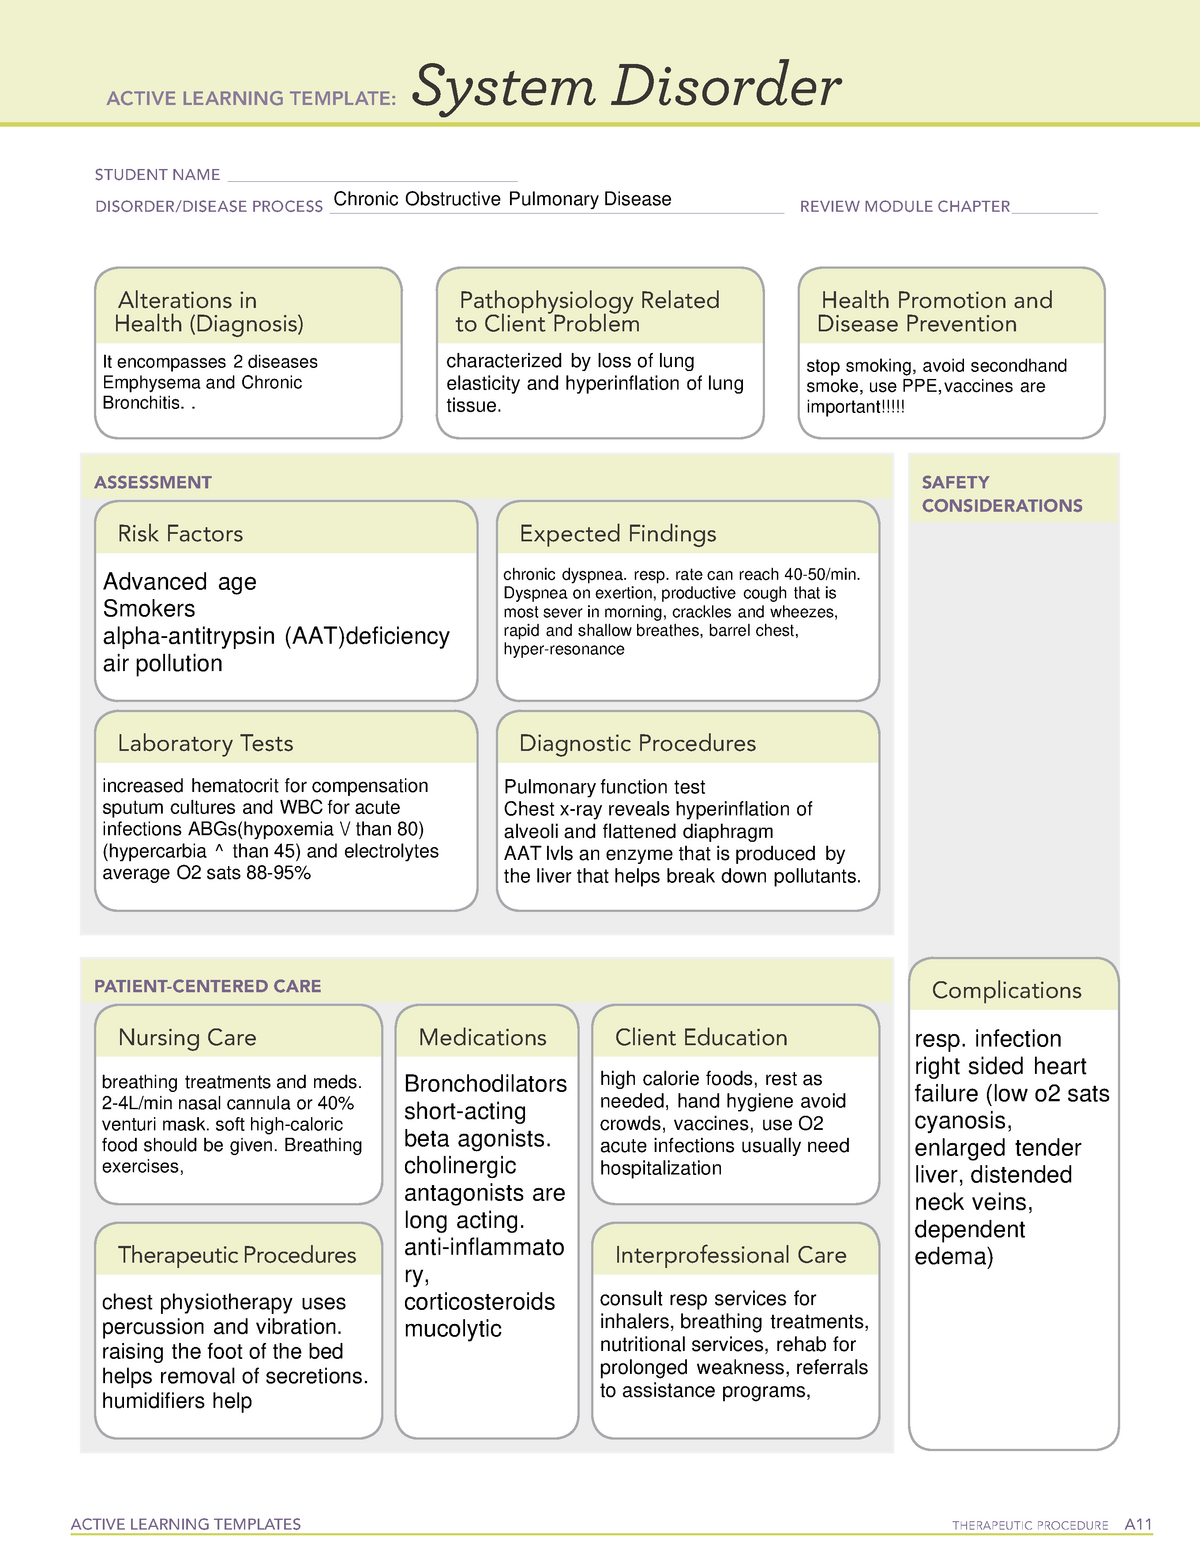 copd-disease-template-active-learning-templates-therapeutic